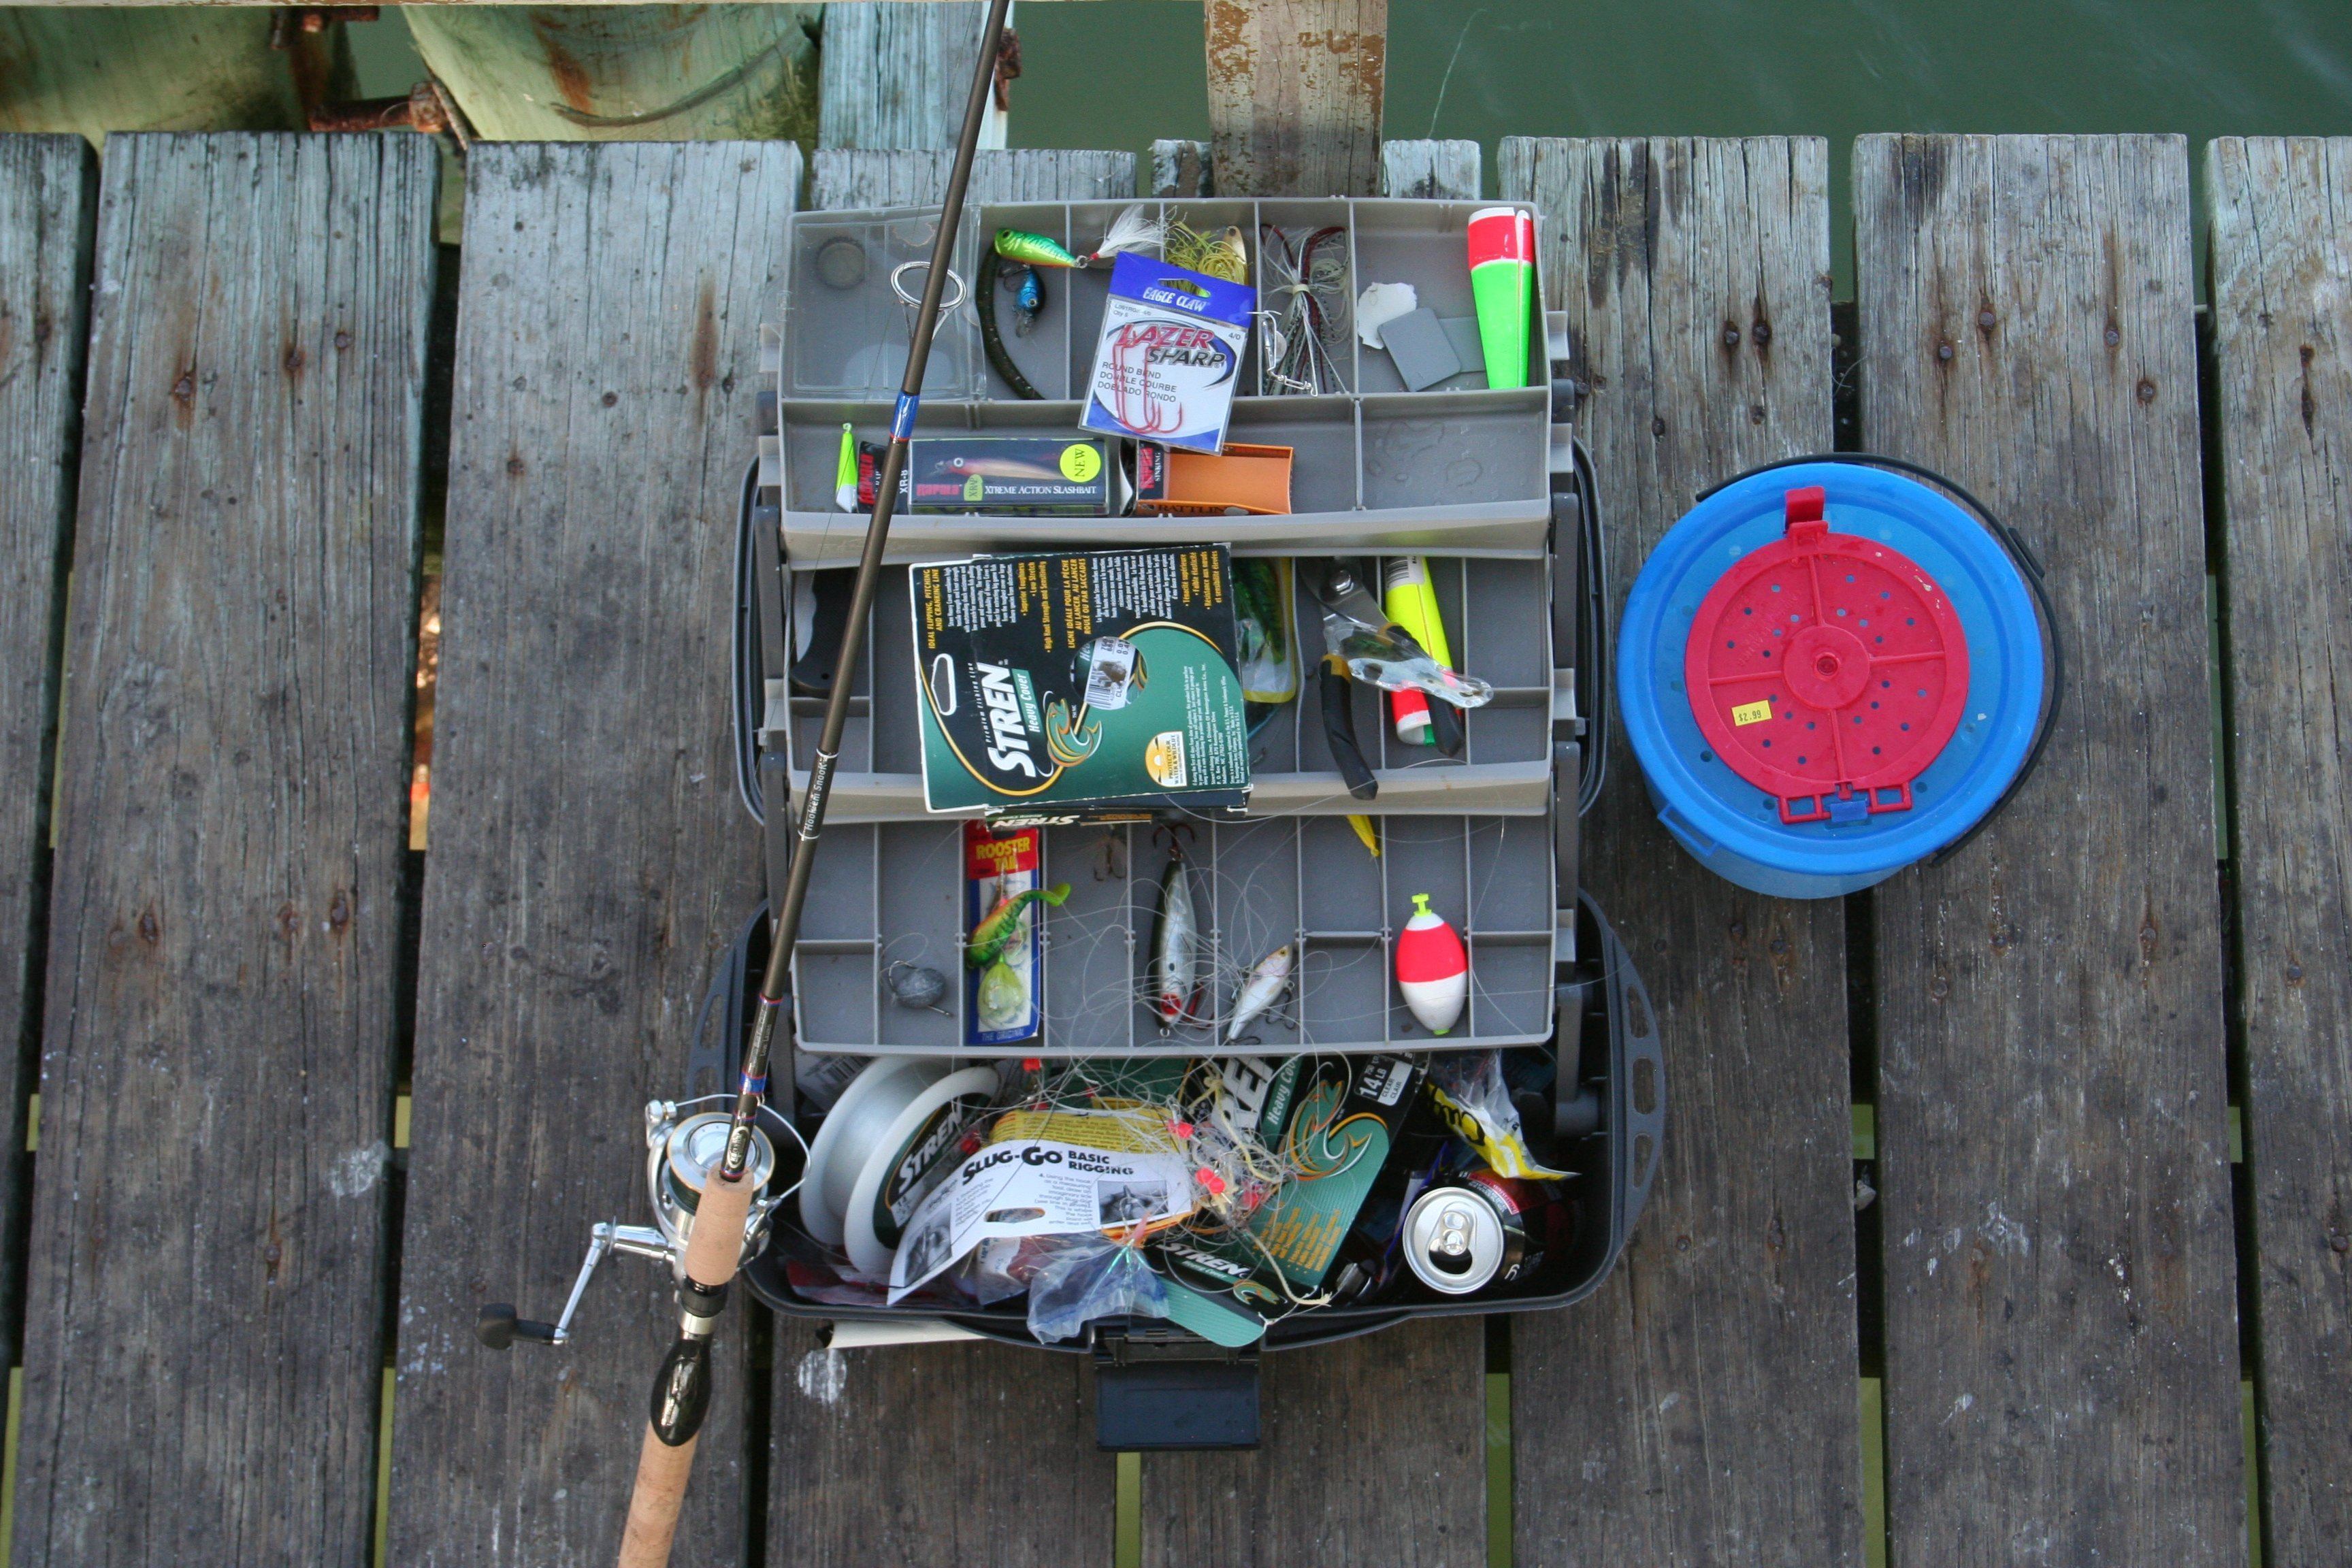 15 Essential Items to Put in Your Fishing Tackle Box – HawkEye